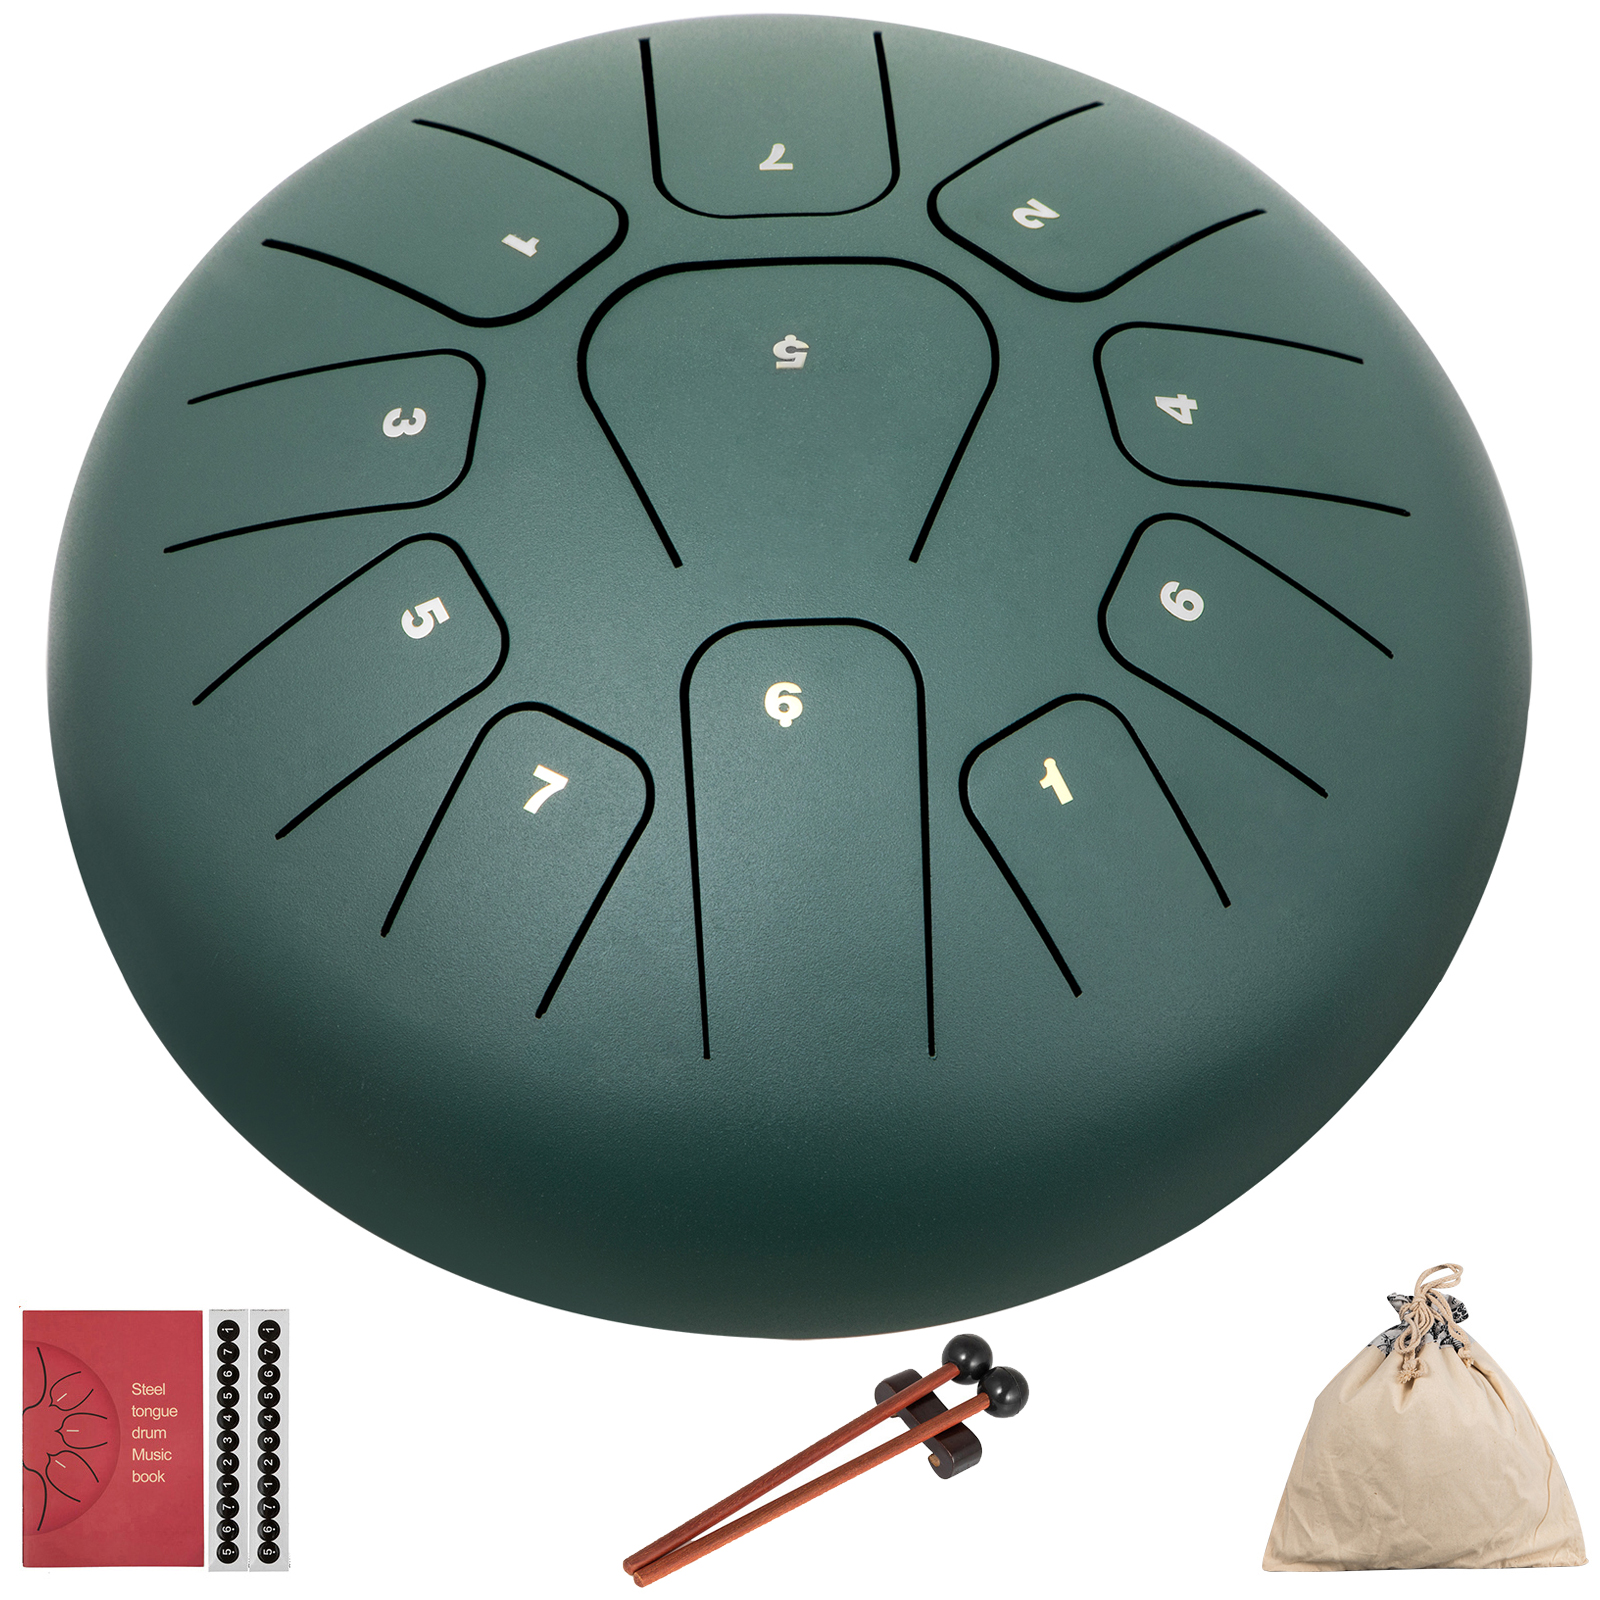 Steel Tongue Drum 8" 11 Notes Pan Drum Handpan Percussion Tank Drum W/bag Mallet от Vevor Many GEOs